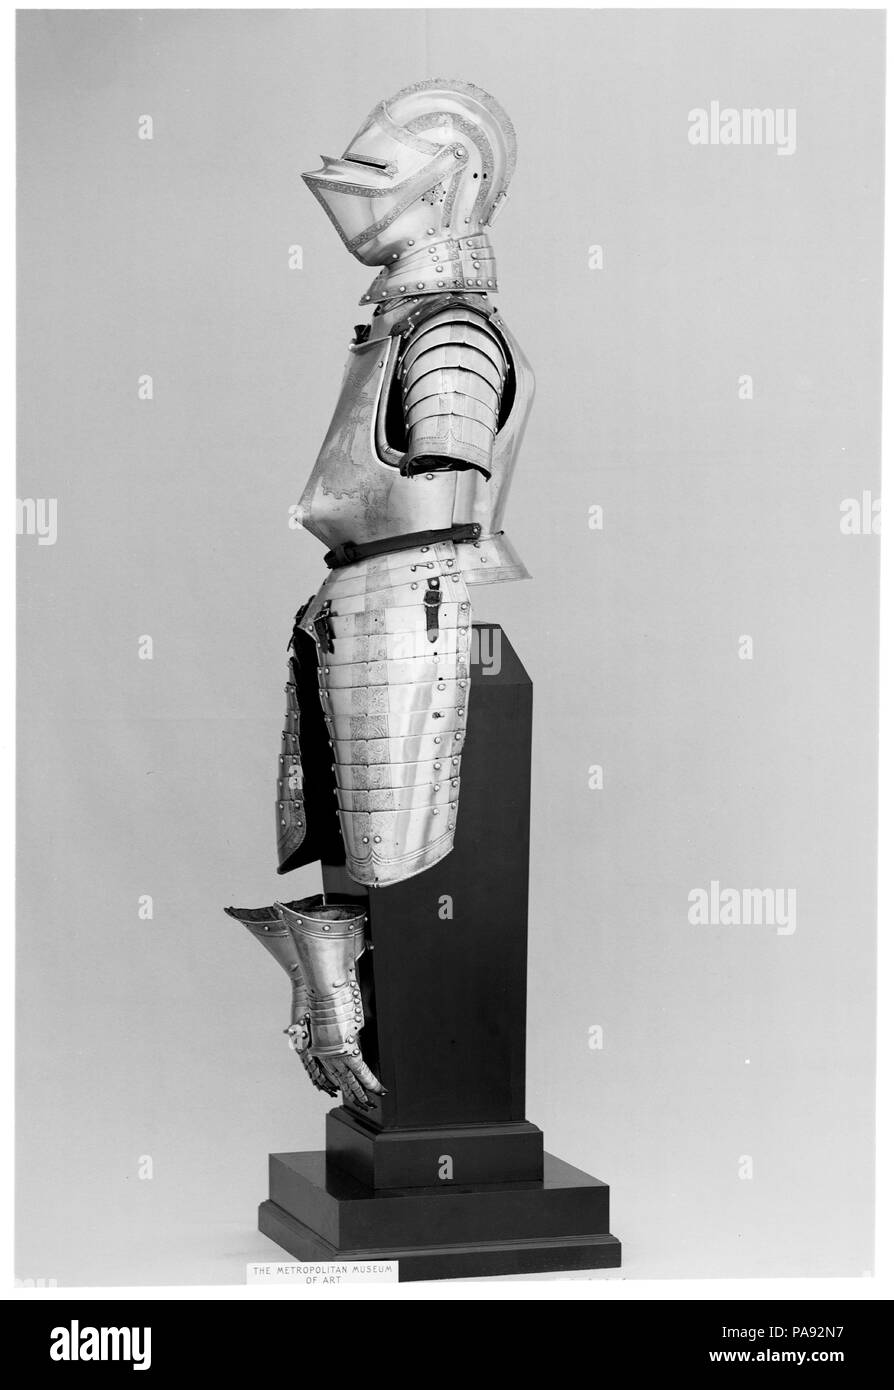 Close Helmet. Armorer: Attributed to Wolfgang Grosschedel (German, Landshut, active ca. 1517-62). Culture: German, Landshut. Dimensions: H. 14 3/4 in. (37.5 cm); W. 9 1/8 in. (23.2 cm); D. 13 1/4 in. (33.7 cm); Wt. 11 lb. 3.1 oz. (5077.4 g). Date: ca. 1560.  Grosschedel, Landshut's most renowned armorer of the mid-sixteenth century, fulfilled many commissions for both the German and the Spanish branches of the Hapsburg family. The decoration of this helmet is very similar to that of a large garniture made by Grosschedel for King Philip II of Spain (1513-1579) about 1560. It also resembles the  Stock Photo